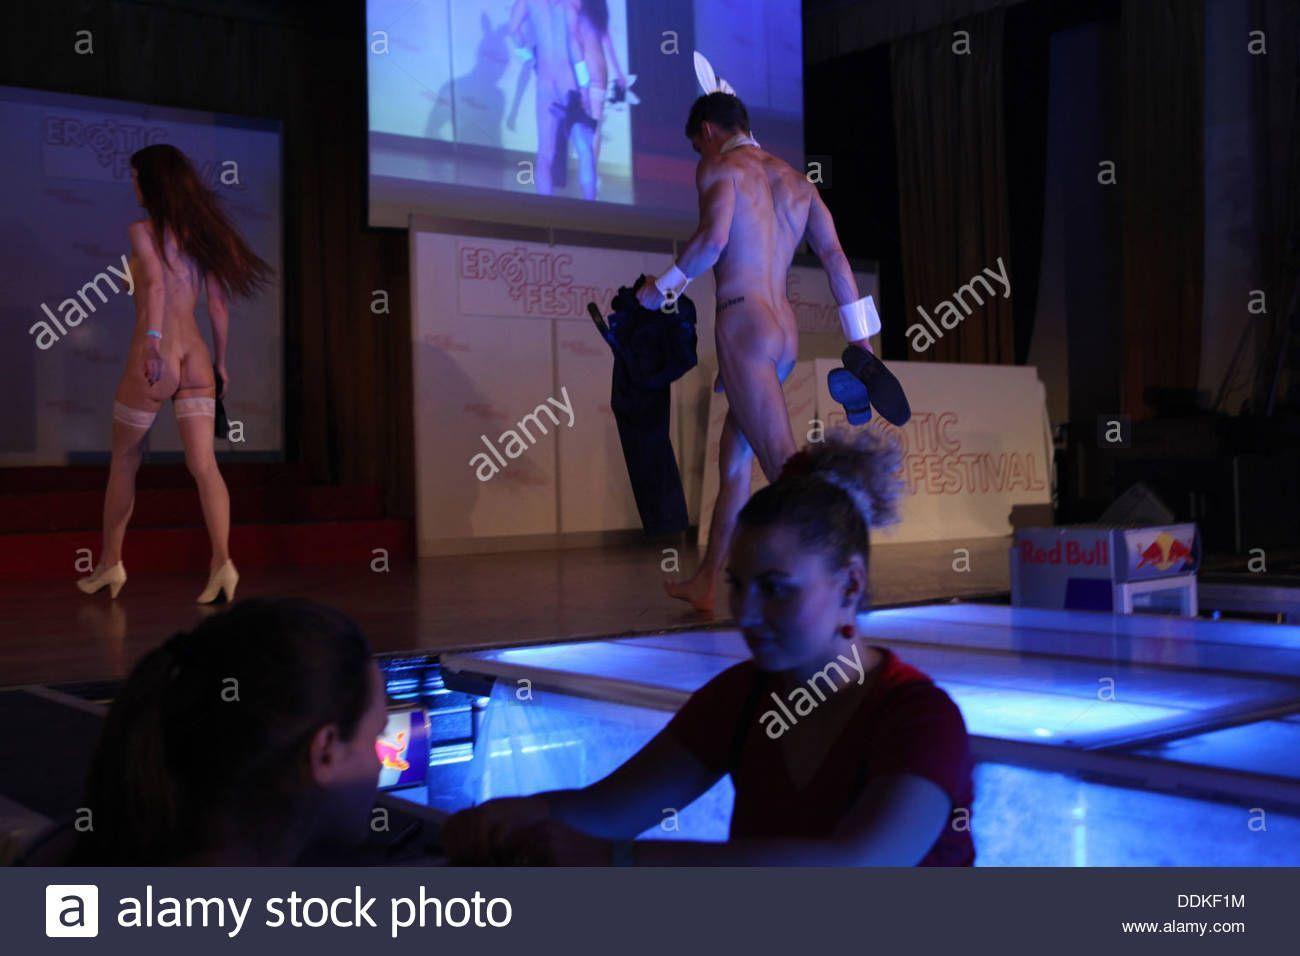 Live sex shows in czech